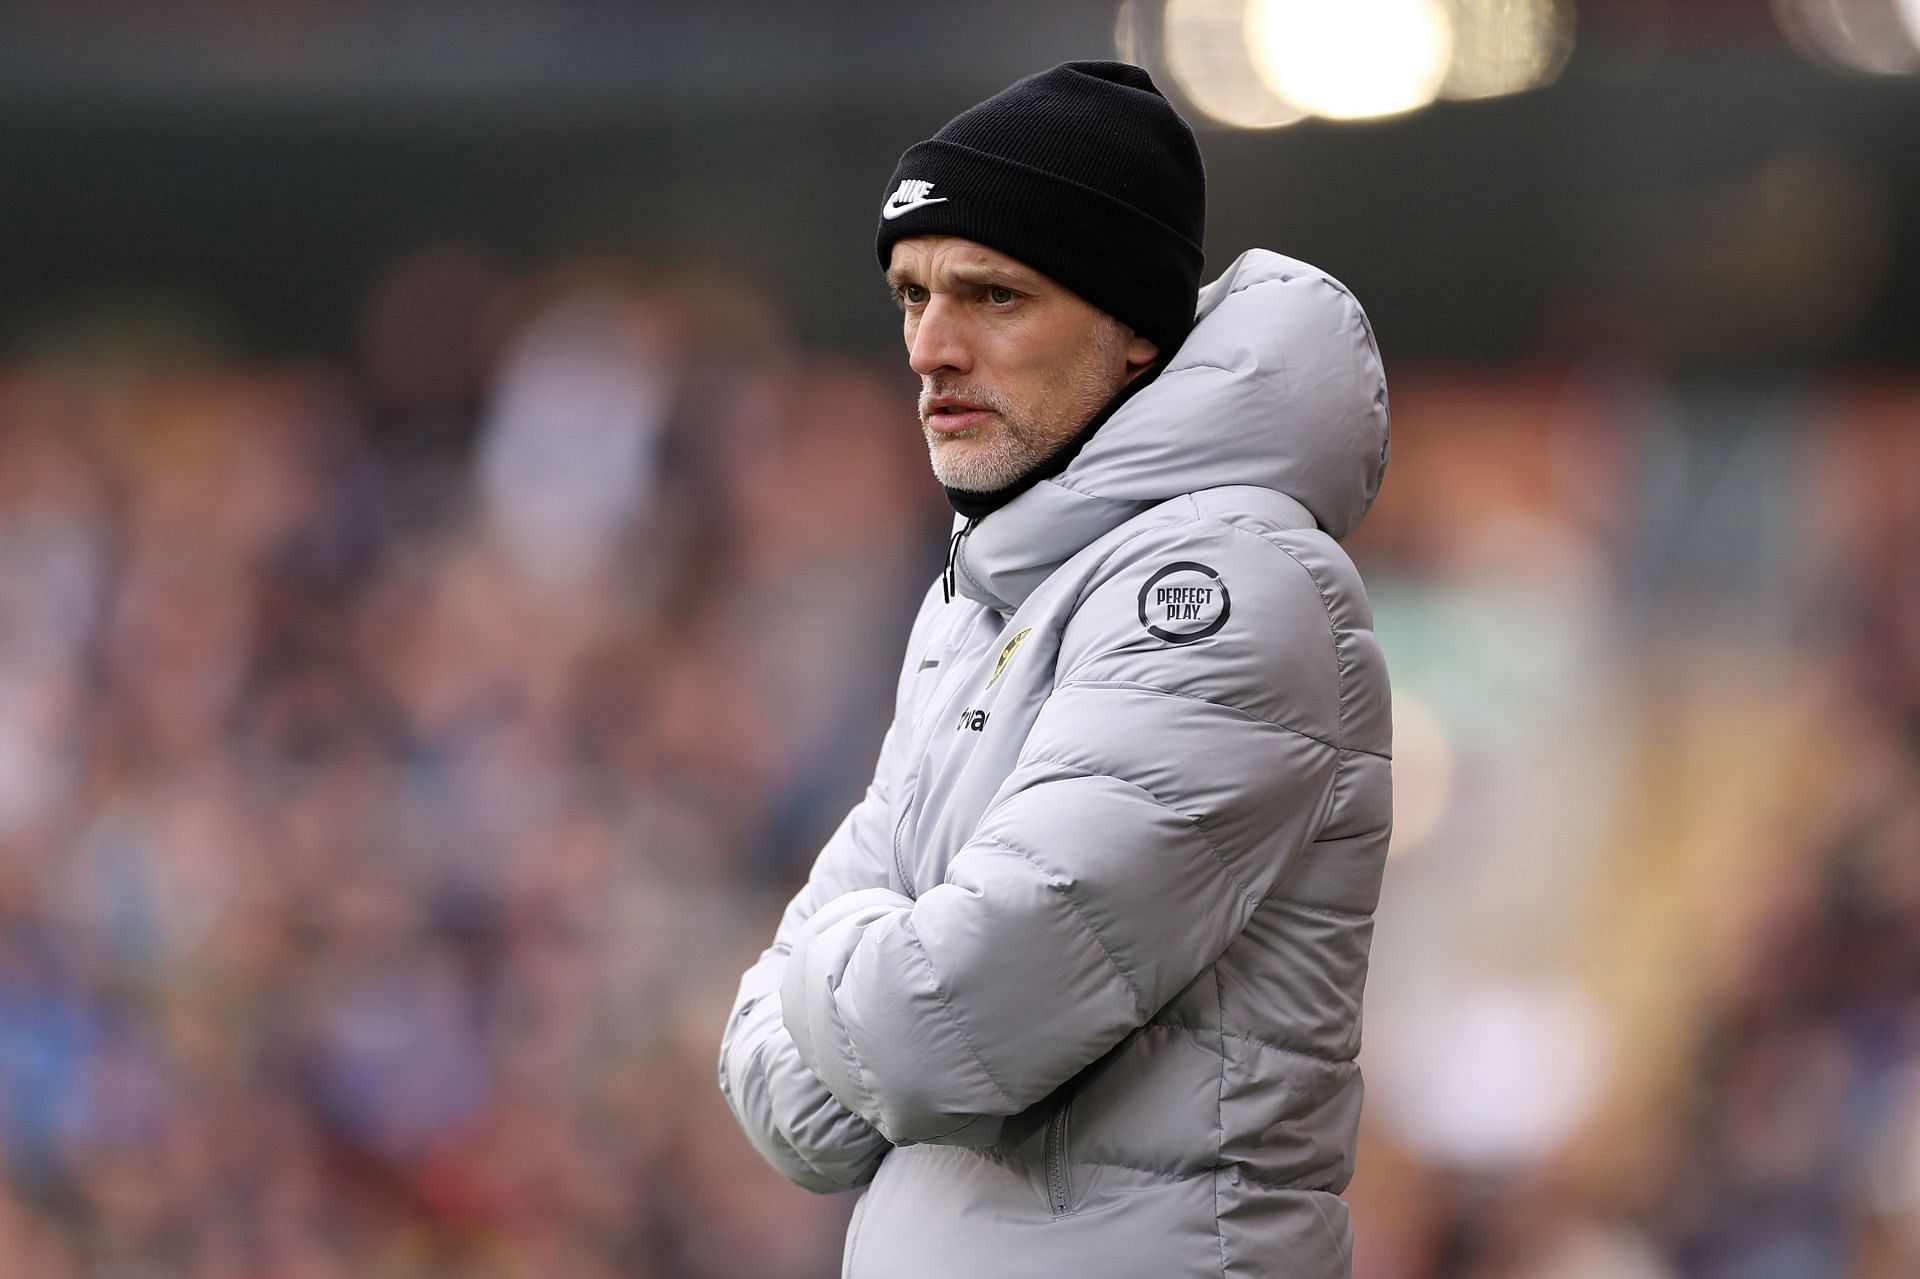 Chelsea manager Thomas Tuchel is preparing to face Real Madrid.